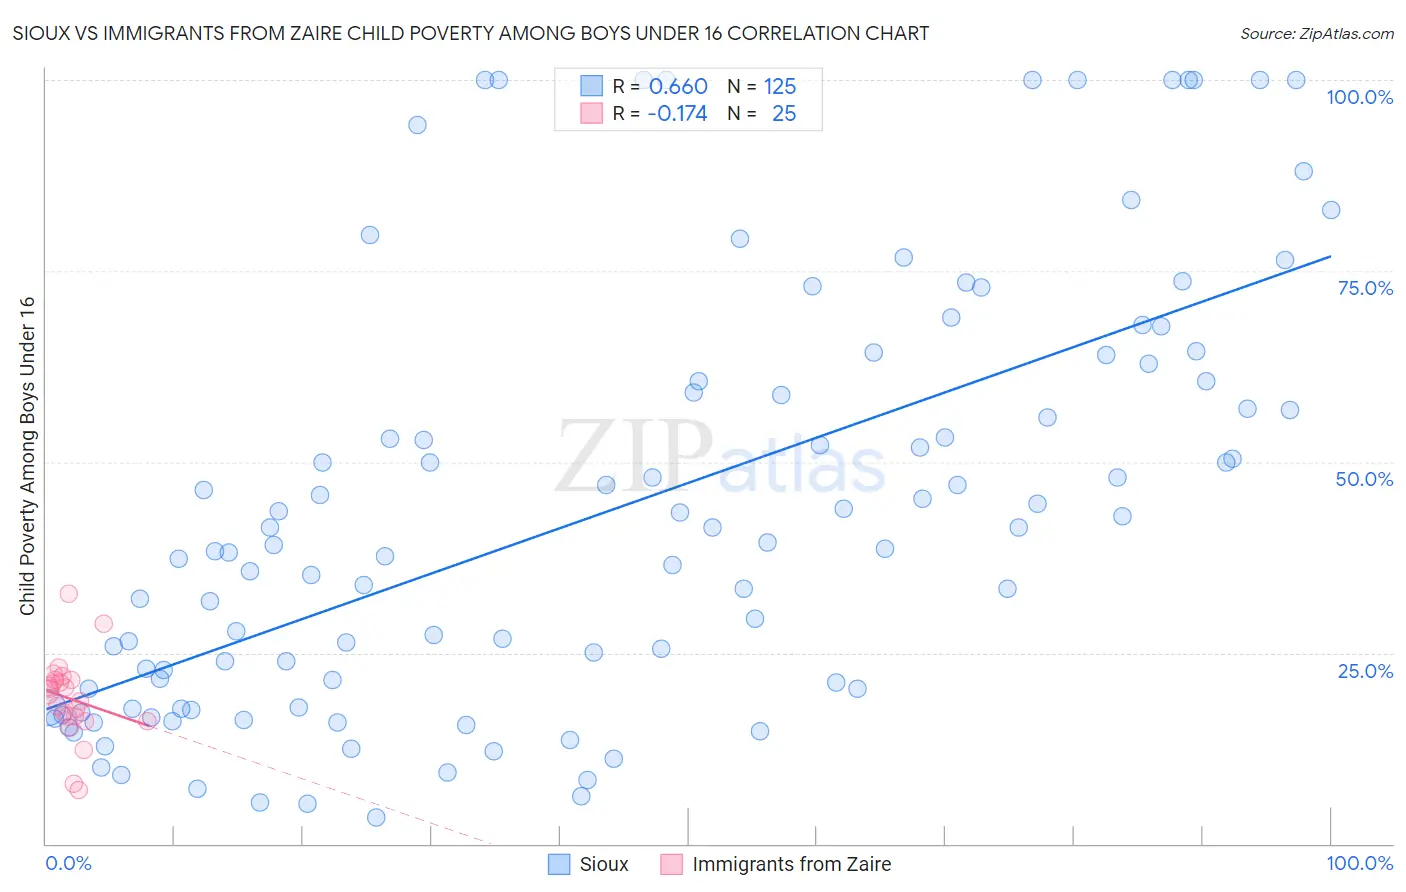 Sioux vs Immigrants from Zaire Child Poverty Among Boys Under 16